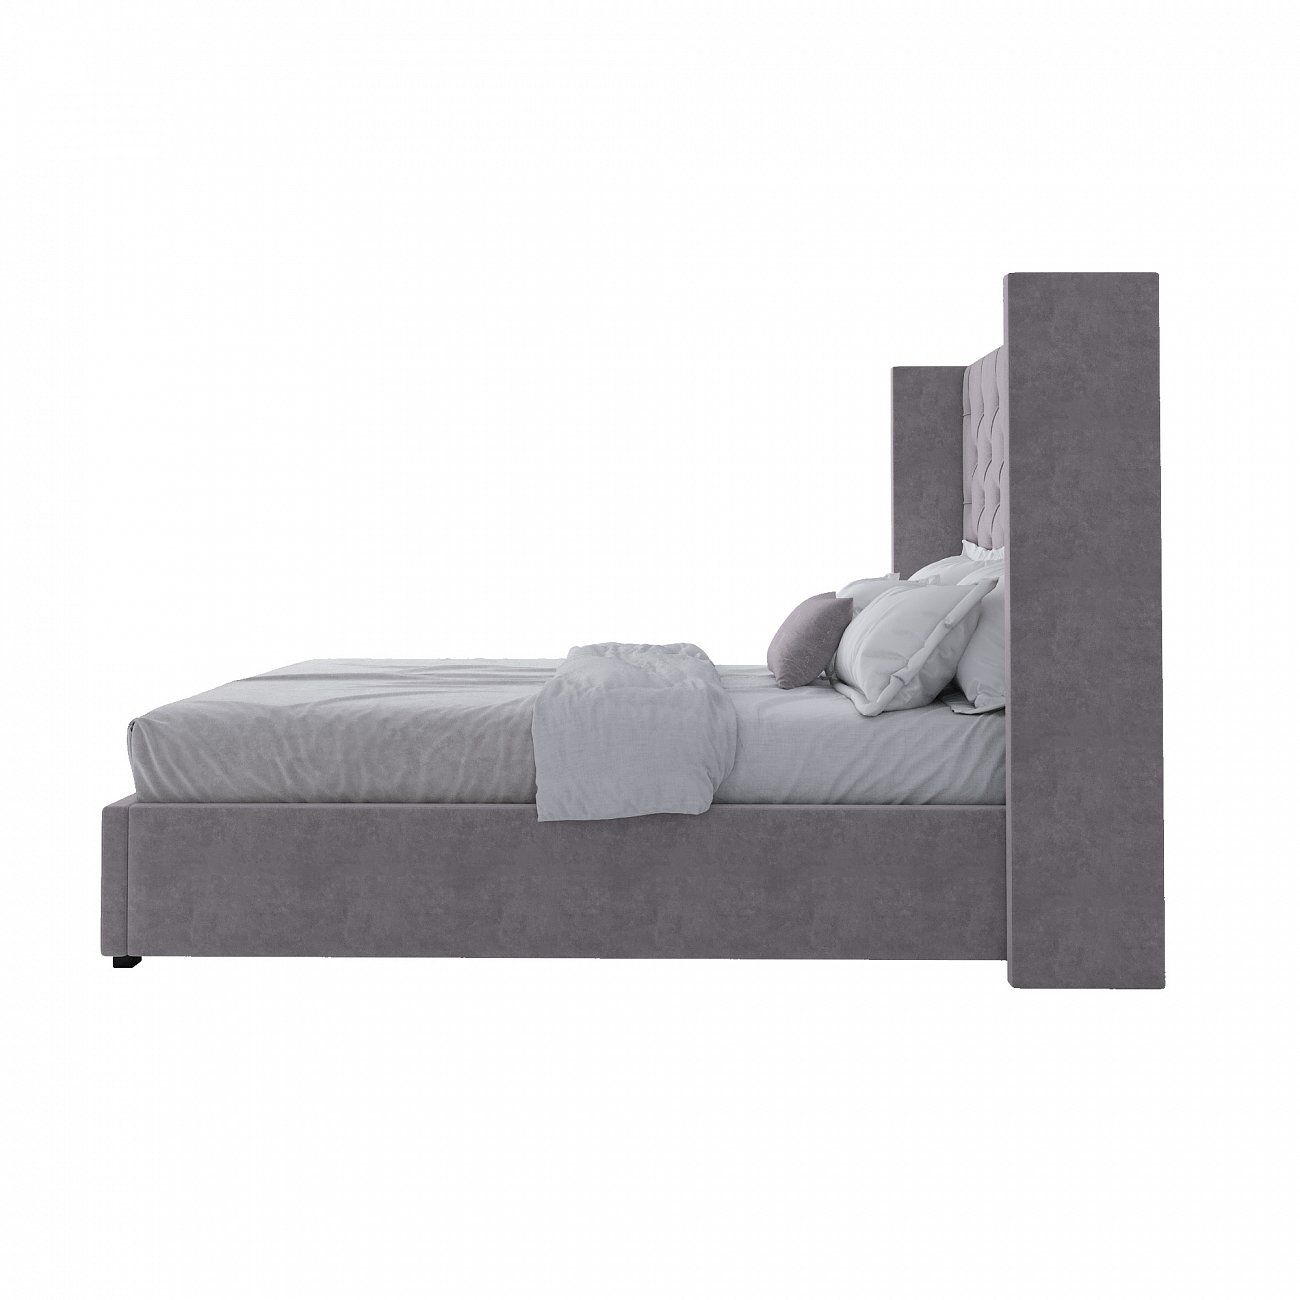 Semi-double teenage bed with a soft headboard 140x200 cm gray-beige Wing-2